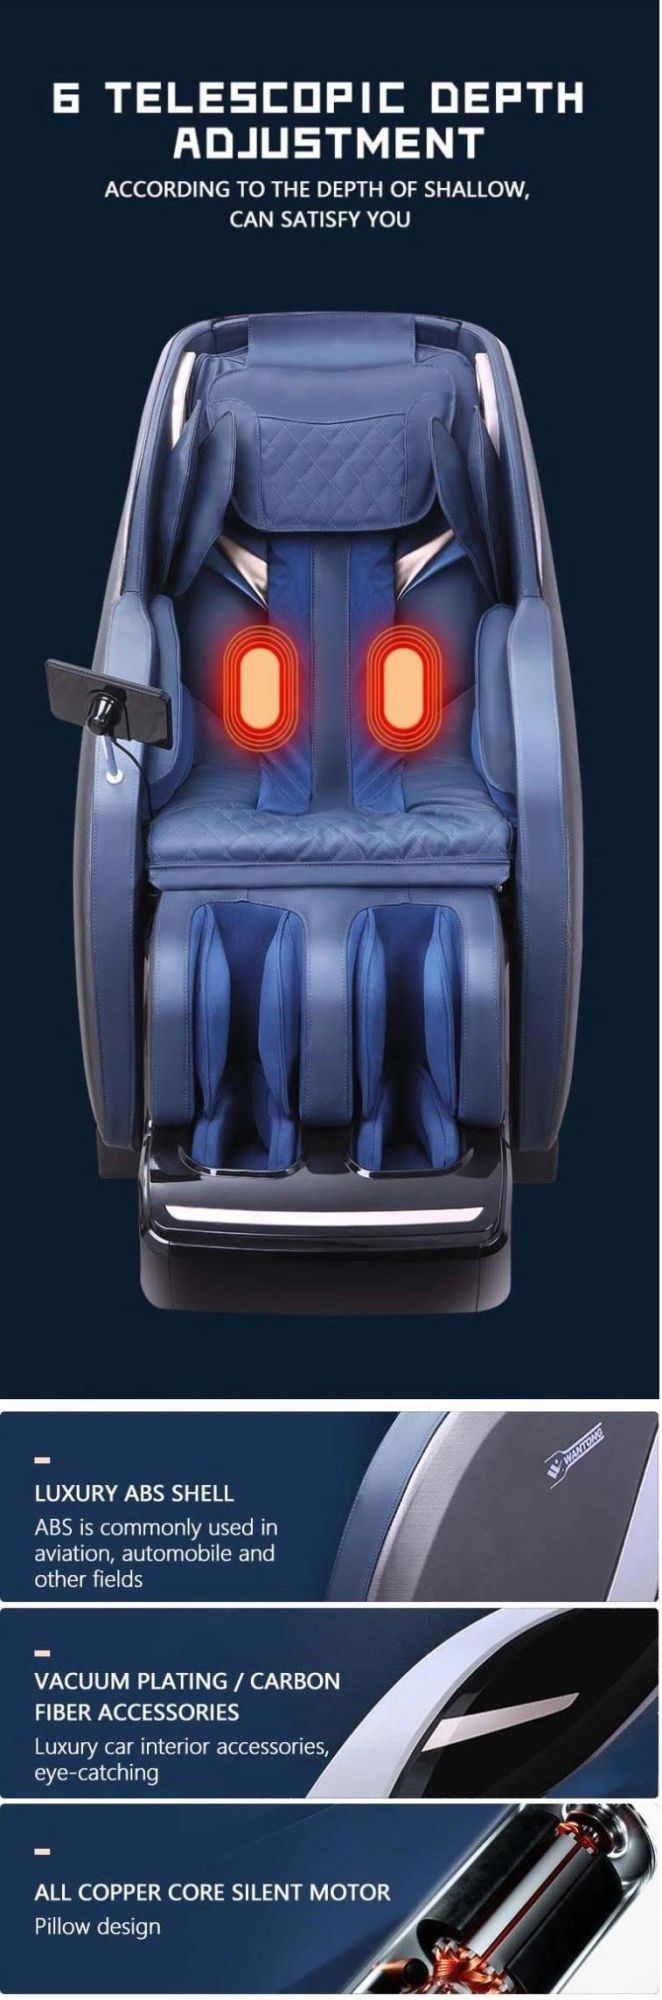 ABS Chair Office Swivel Massage Chair Price Without Foot Rest